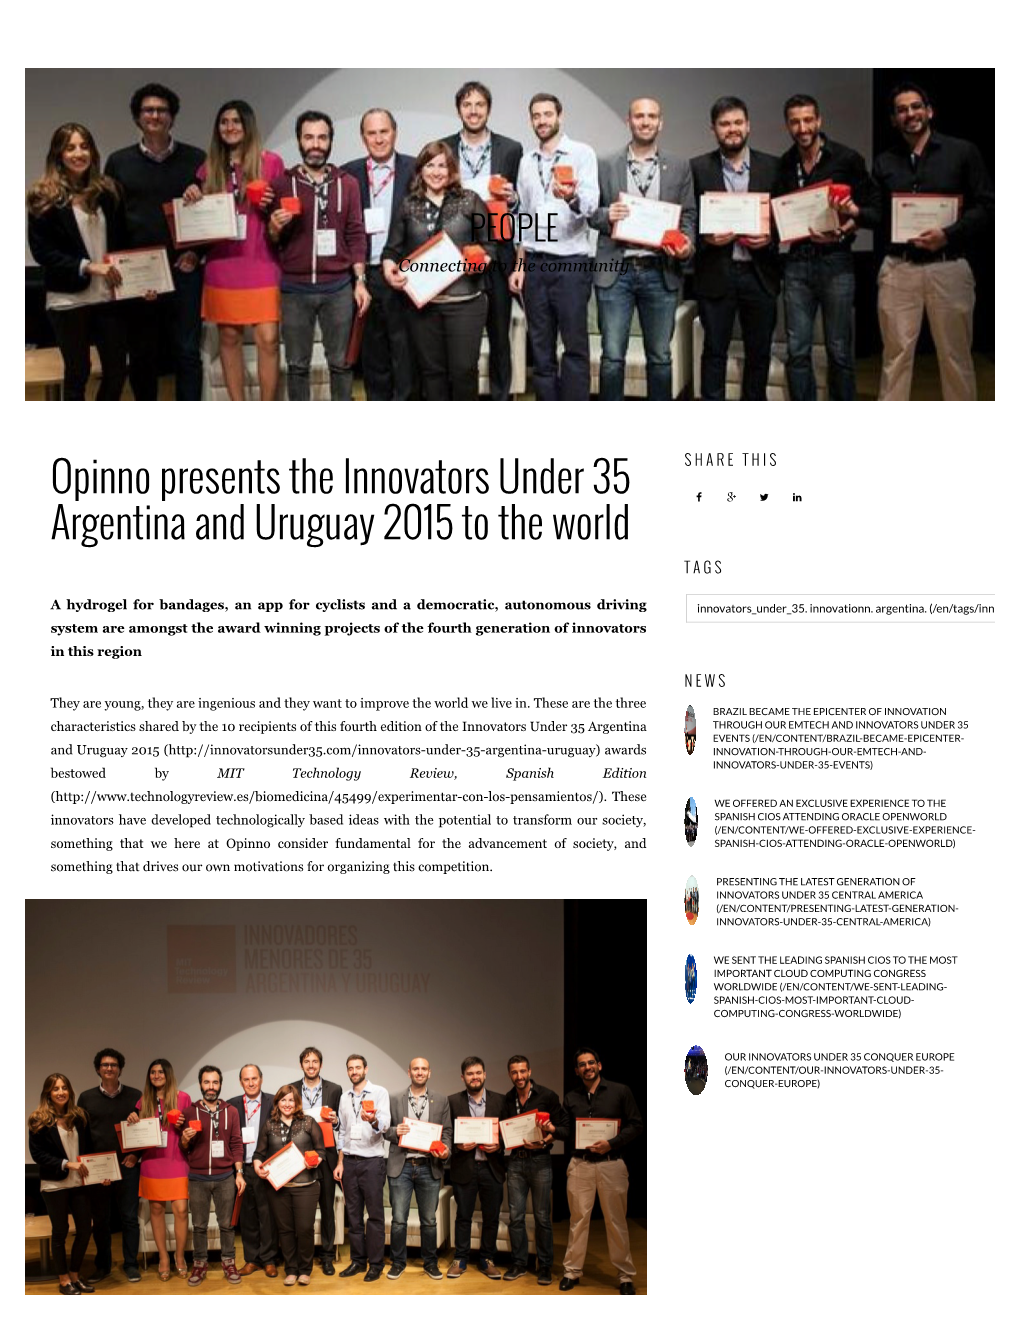 Opinno Presents the Innovators Under 35 Argentina and Uruguay 2015 To